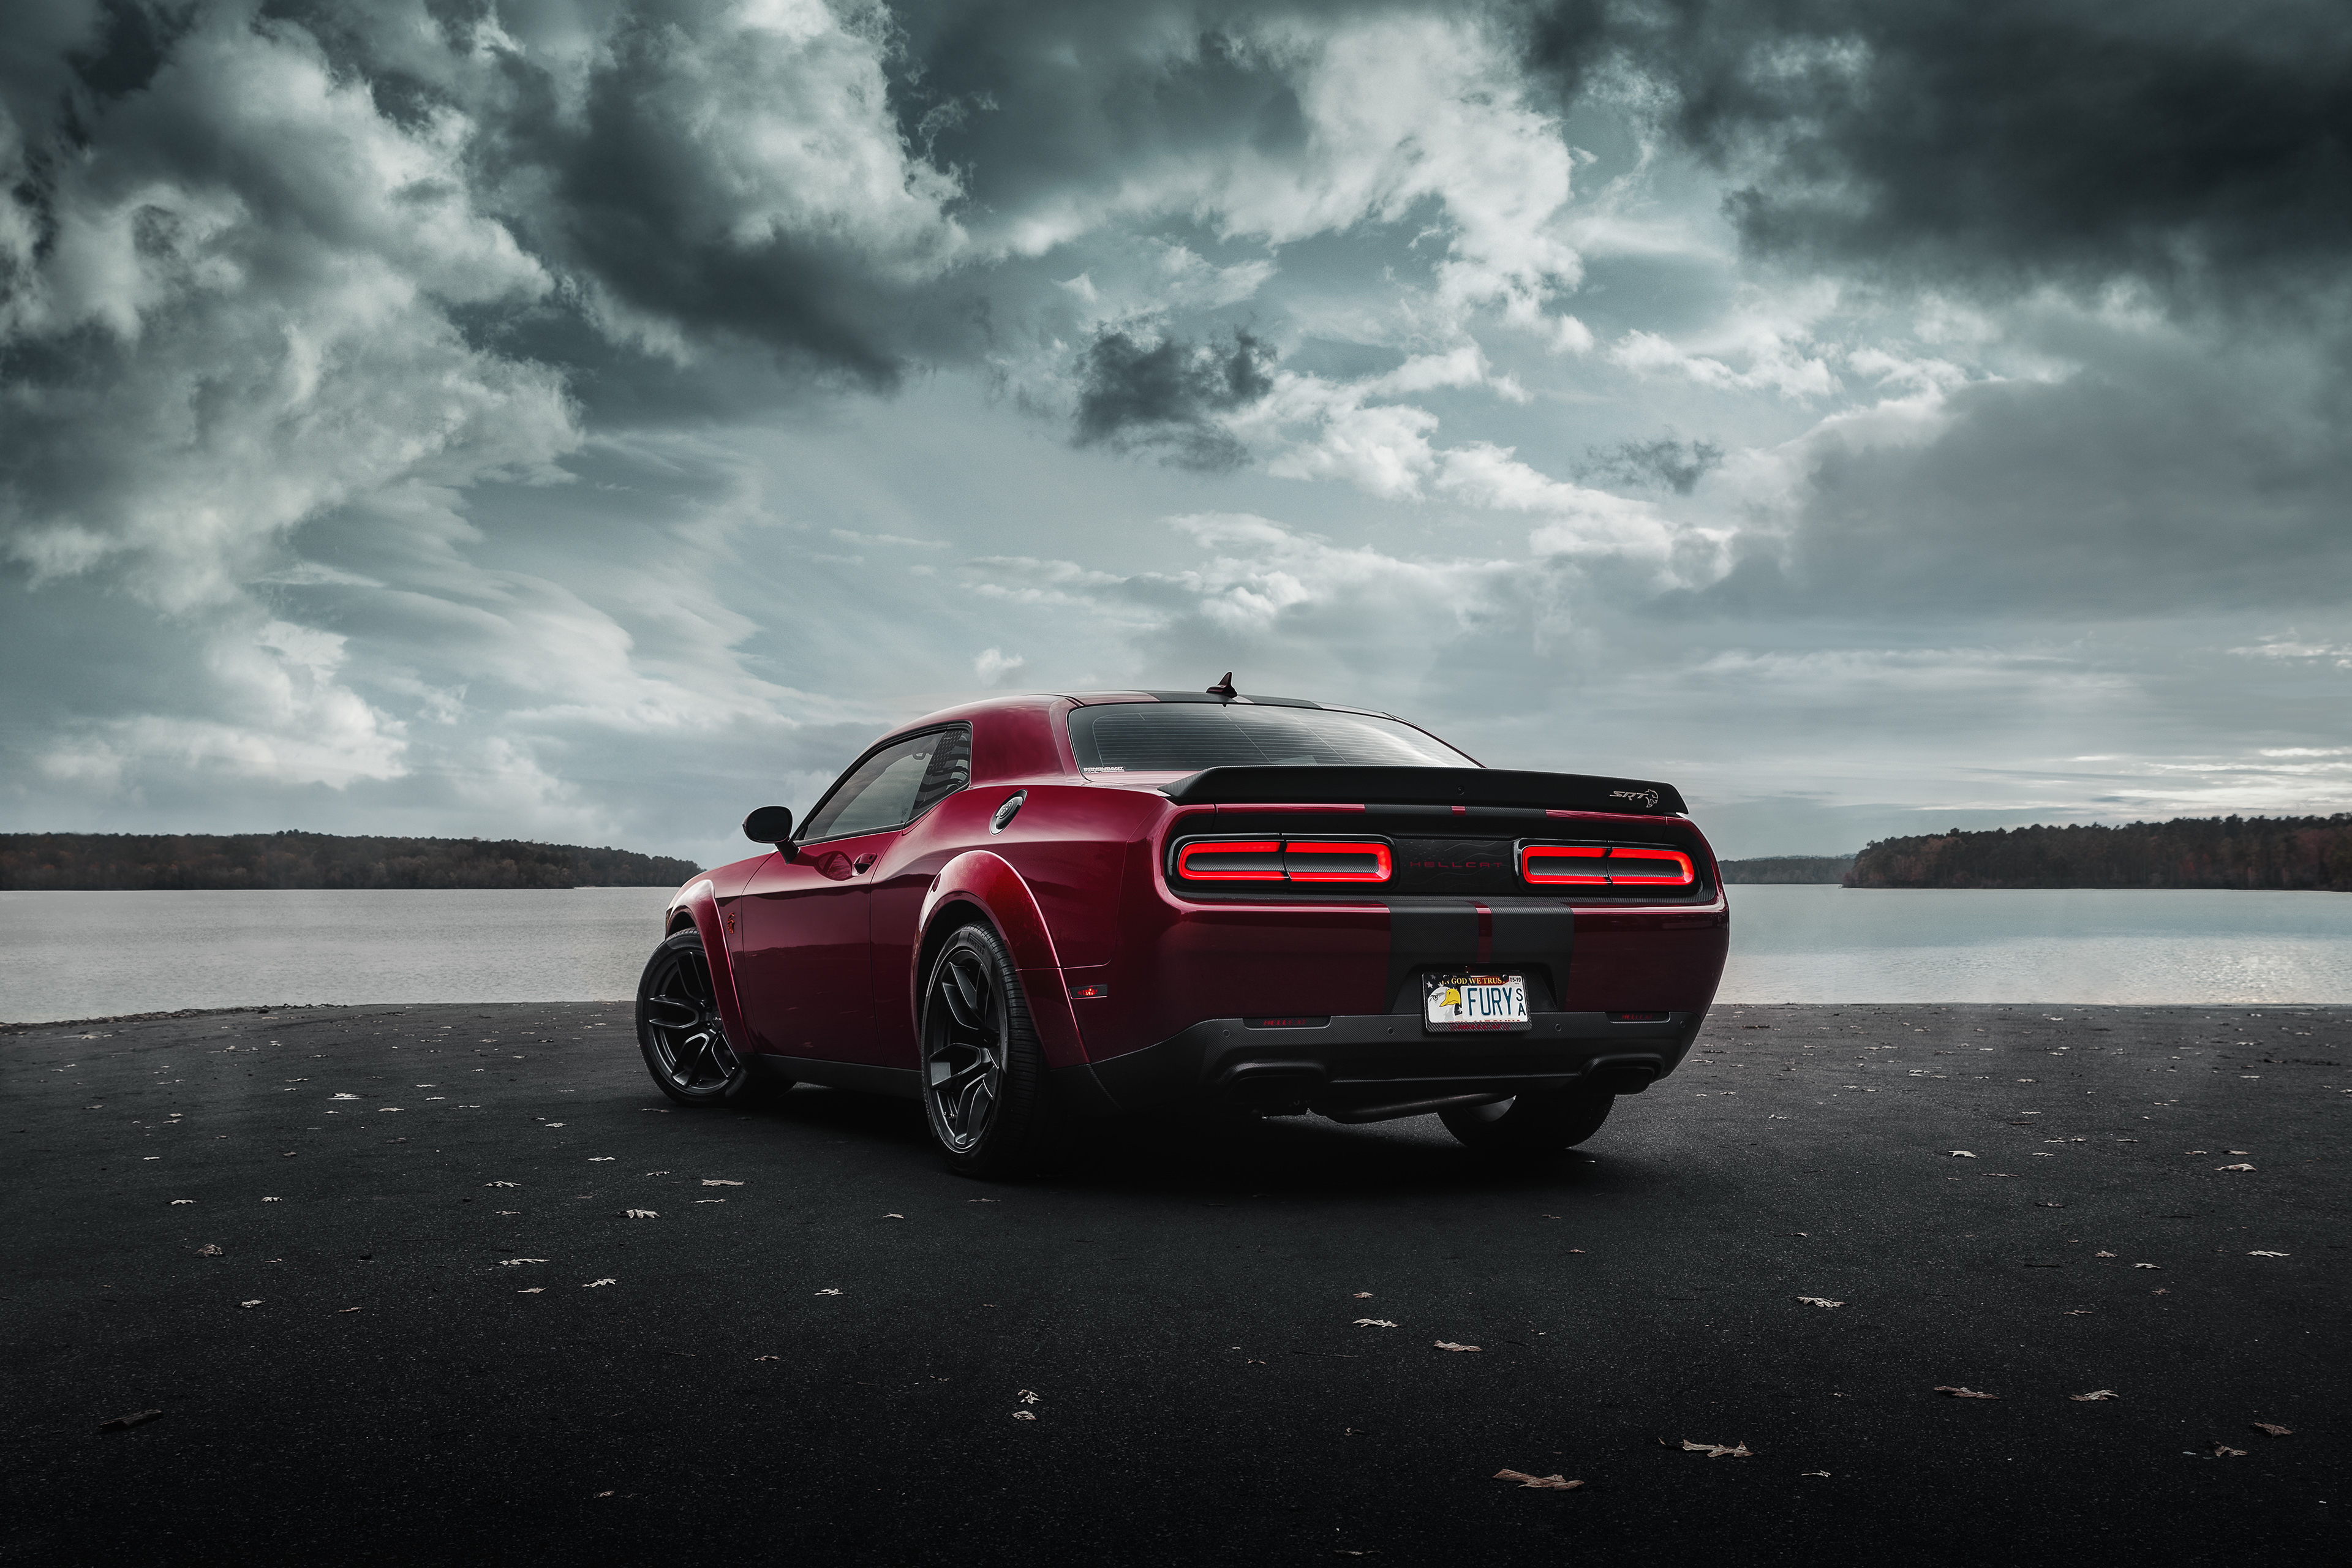 Free photo Red 2019 Dodge Challenger Srt Hellcat Widebody on the riverbank photographed from behind